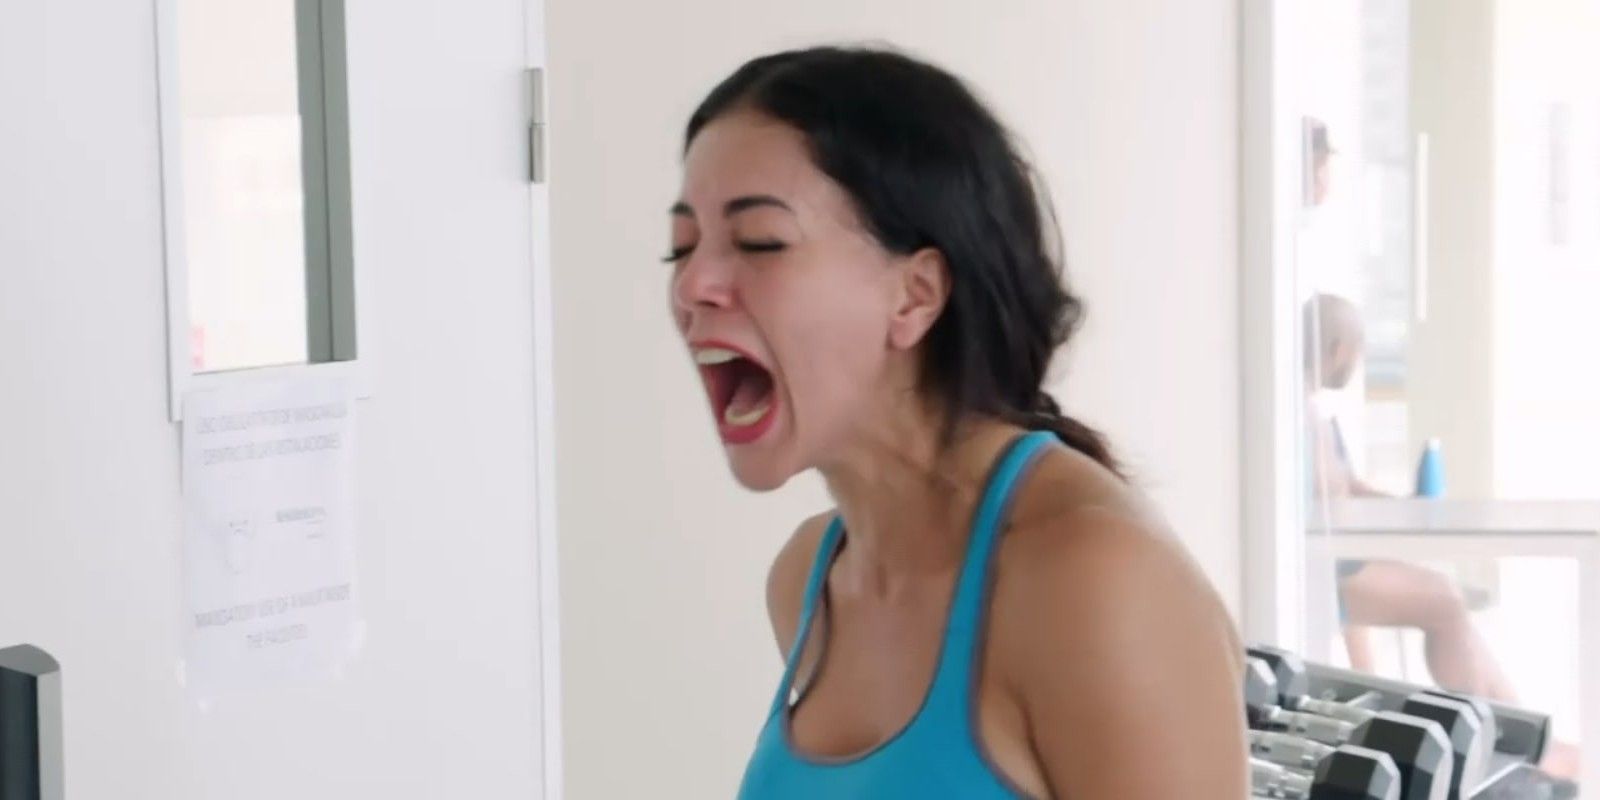 90 Day Fiancé: Before the 90 Days star Jasmine Pineda yelling at Gino wearing blue top